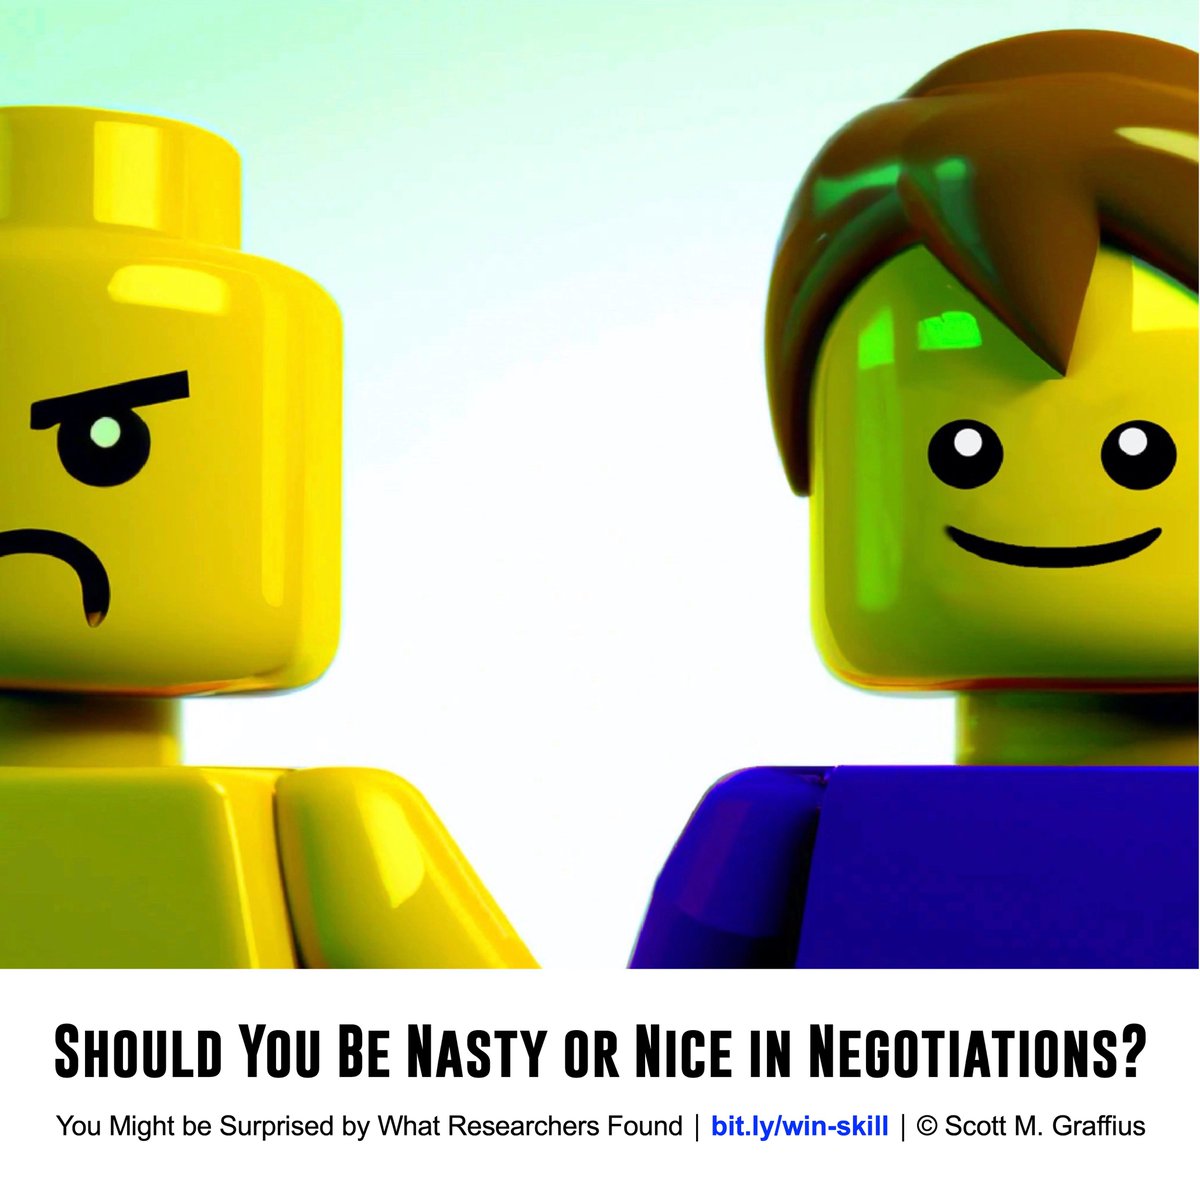 Should you be nice in negotiations? You might be surprised by what researchers found. 🔗 scottgraffius.com/blog/files/win… #Business #Career #Negotiate #Profession #Negotiation #NegotiationSkills #CareerDevelopment #SoftSkill #Emotions #Dealmaking #EmotionalIntelligence #Adaptability